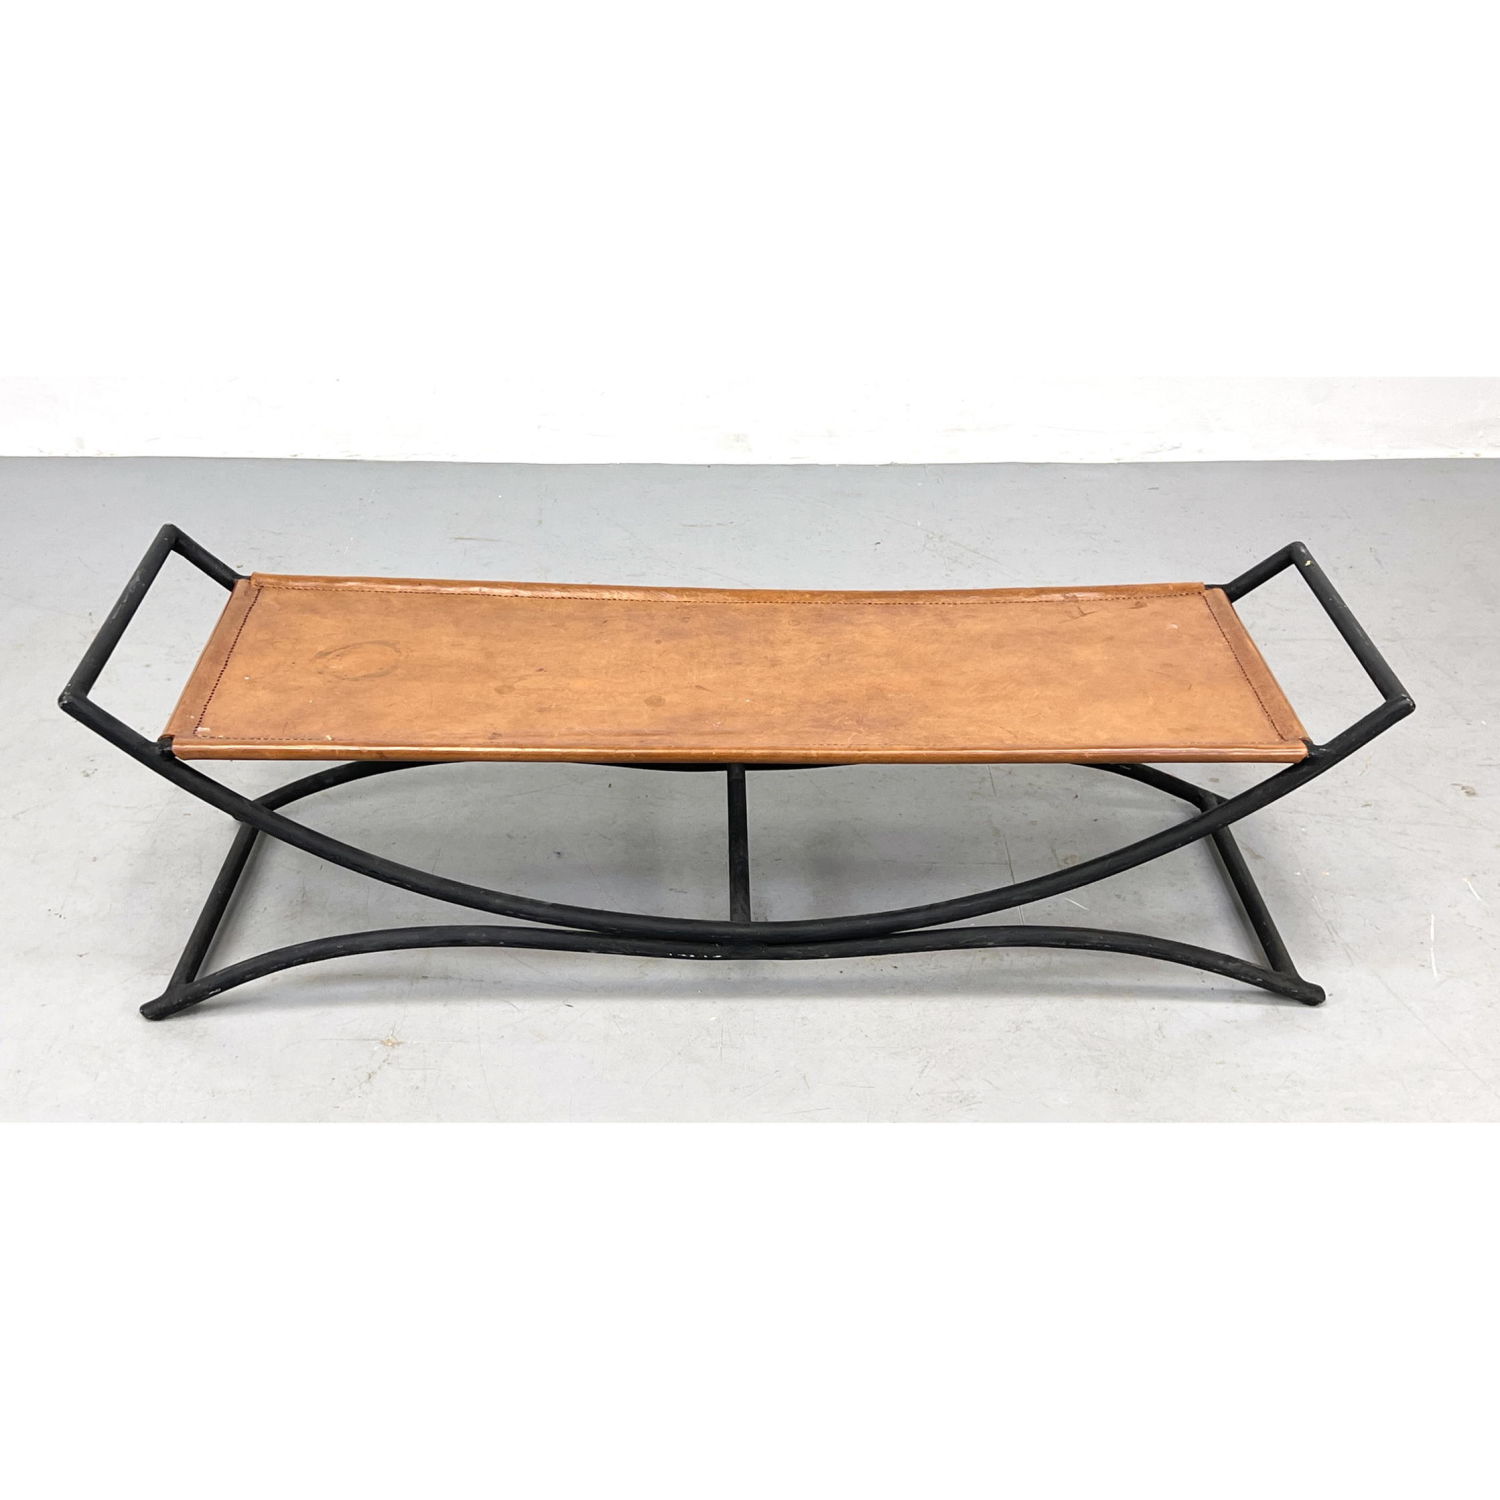 Iron and Leather low bench 

Dimensions: